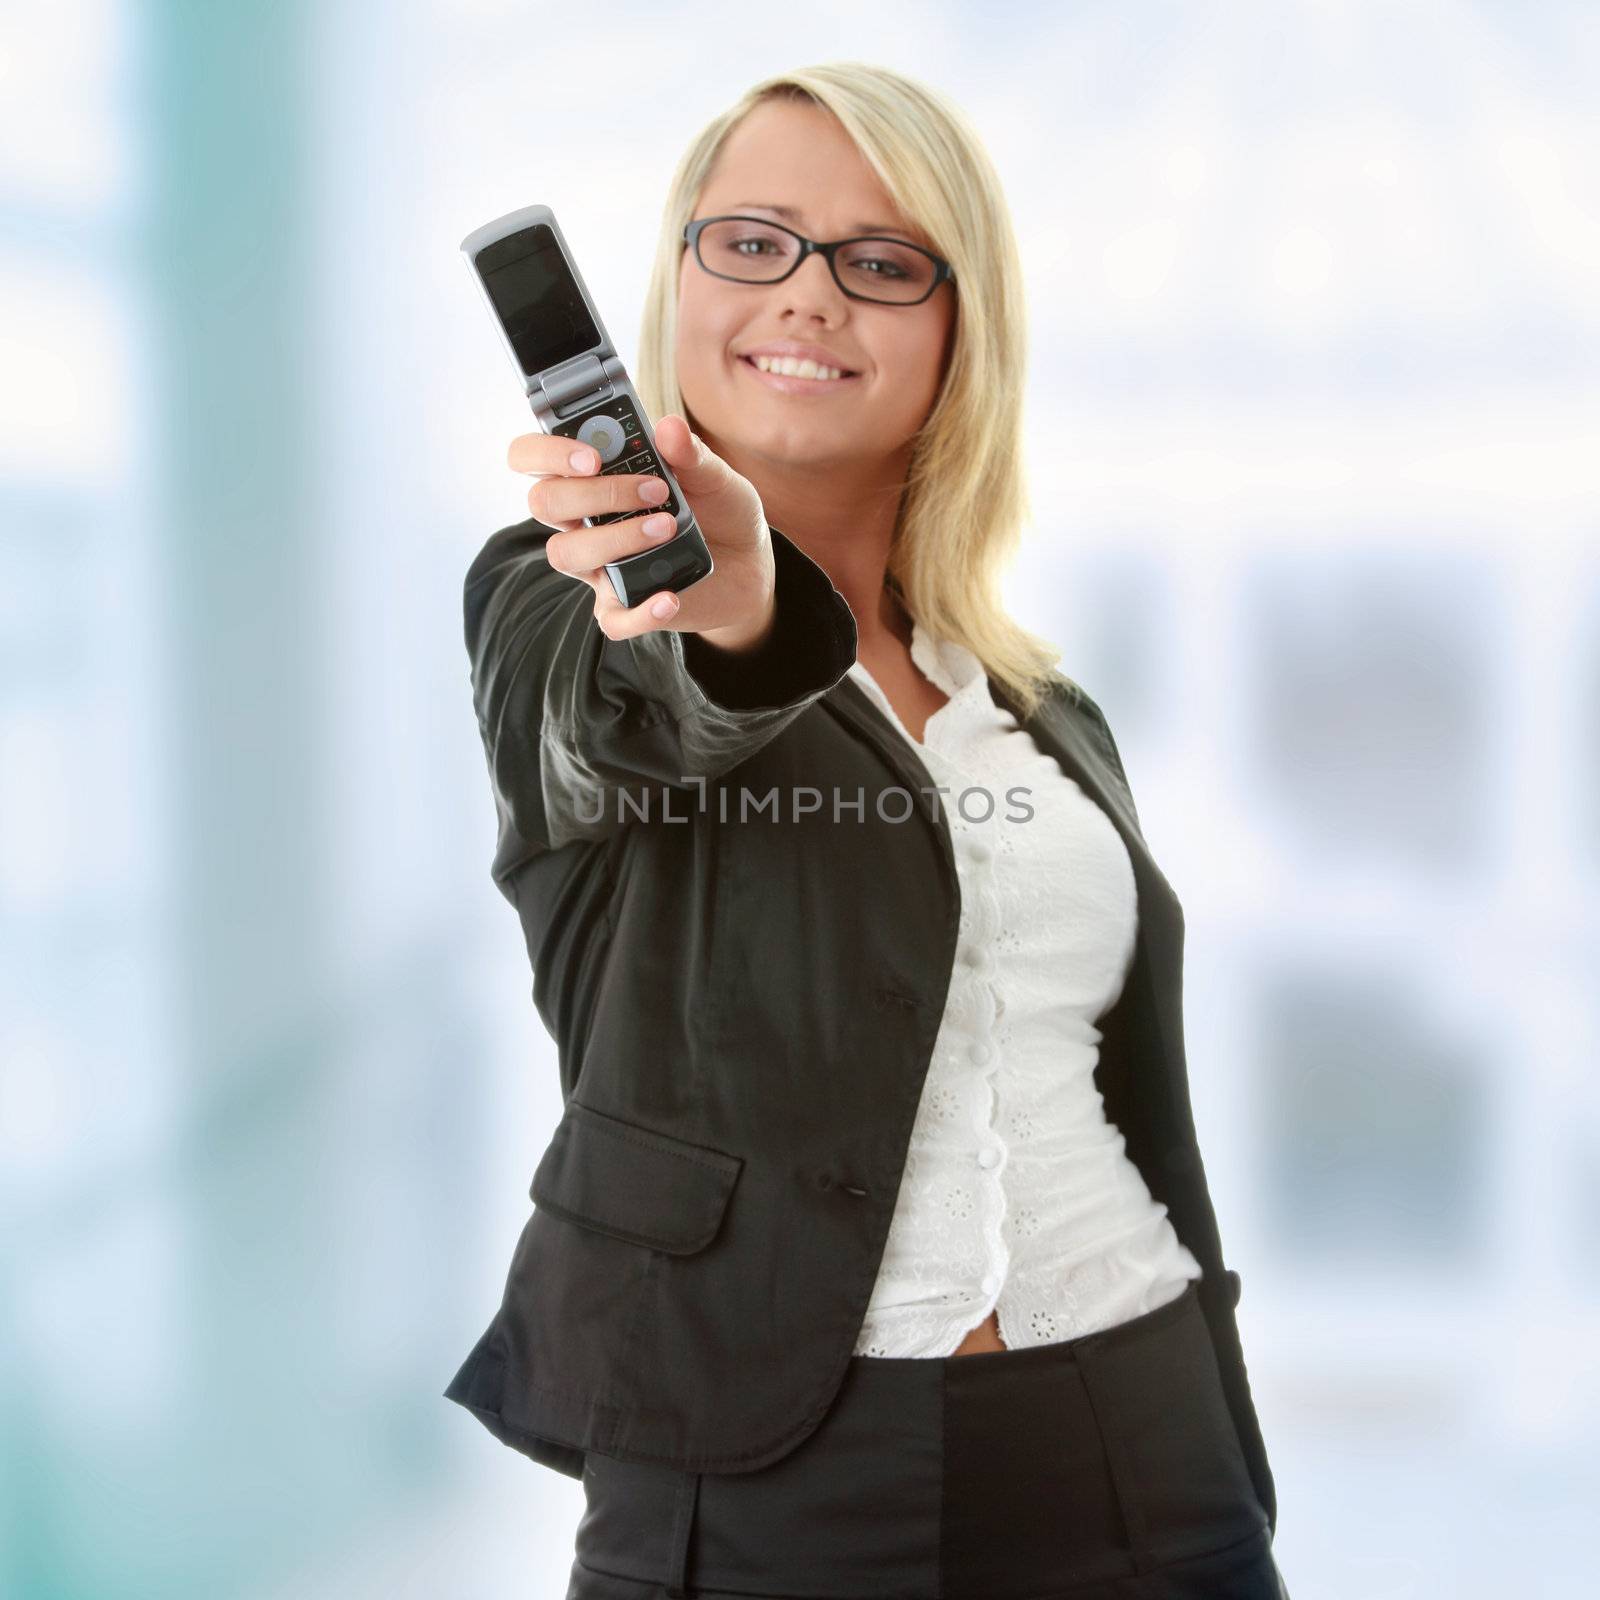 Attractive young business women with cellular phone - focus on phone